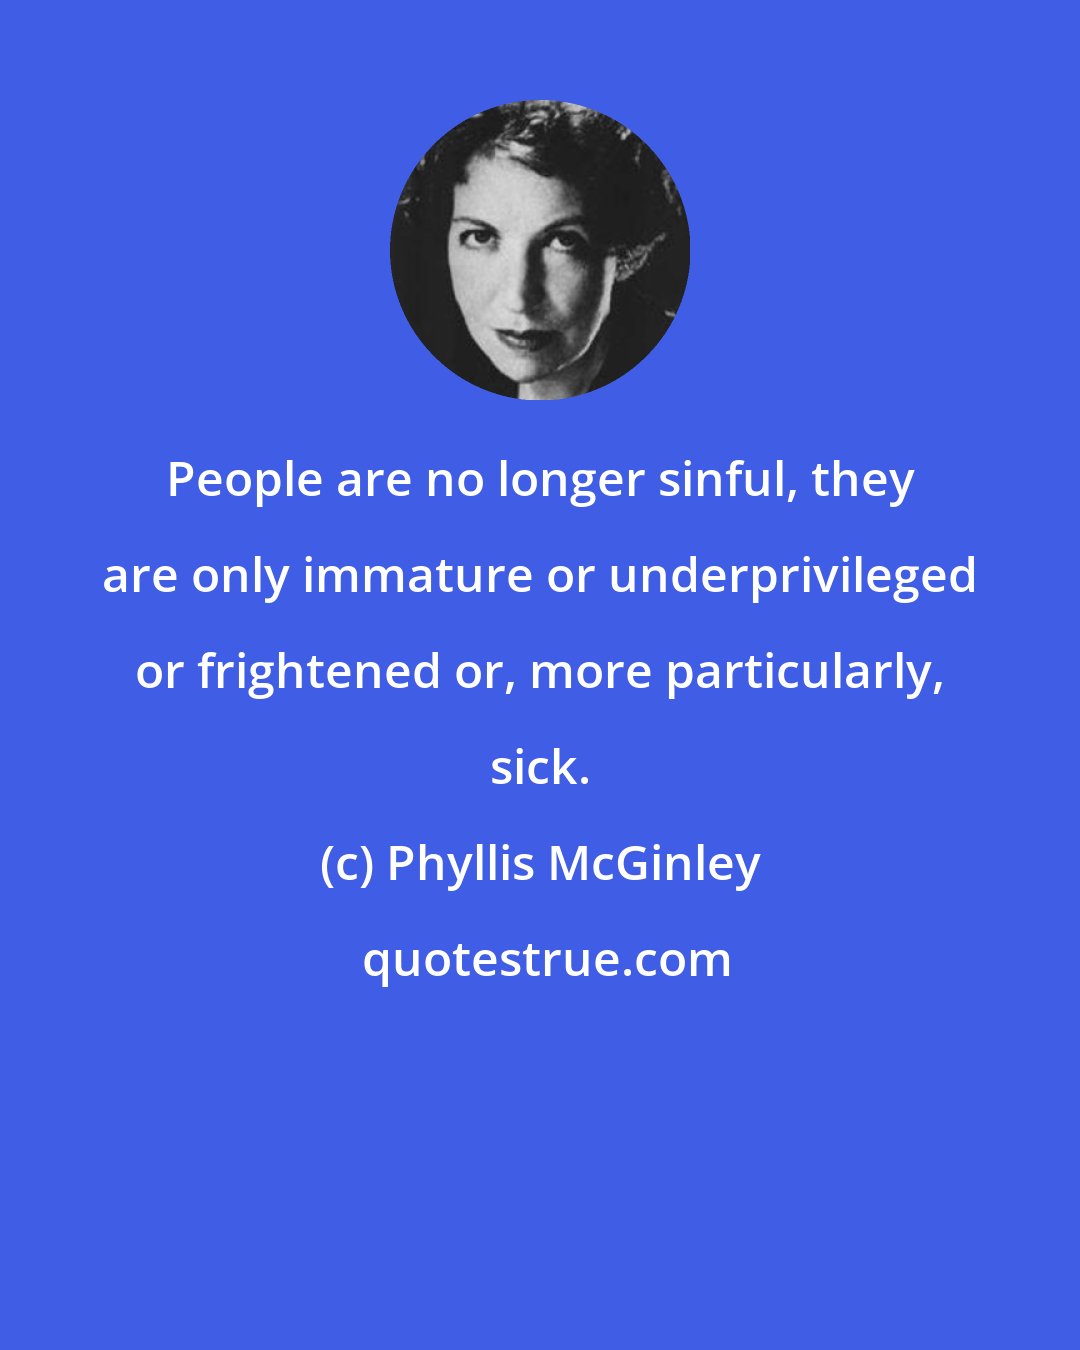 Phyllis McGinley: People are no longer sinful, they are only immature or underprivileged or frightened or, more particularly, sick.